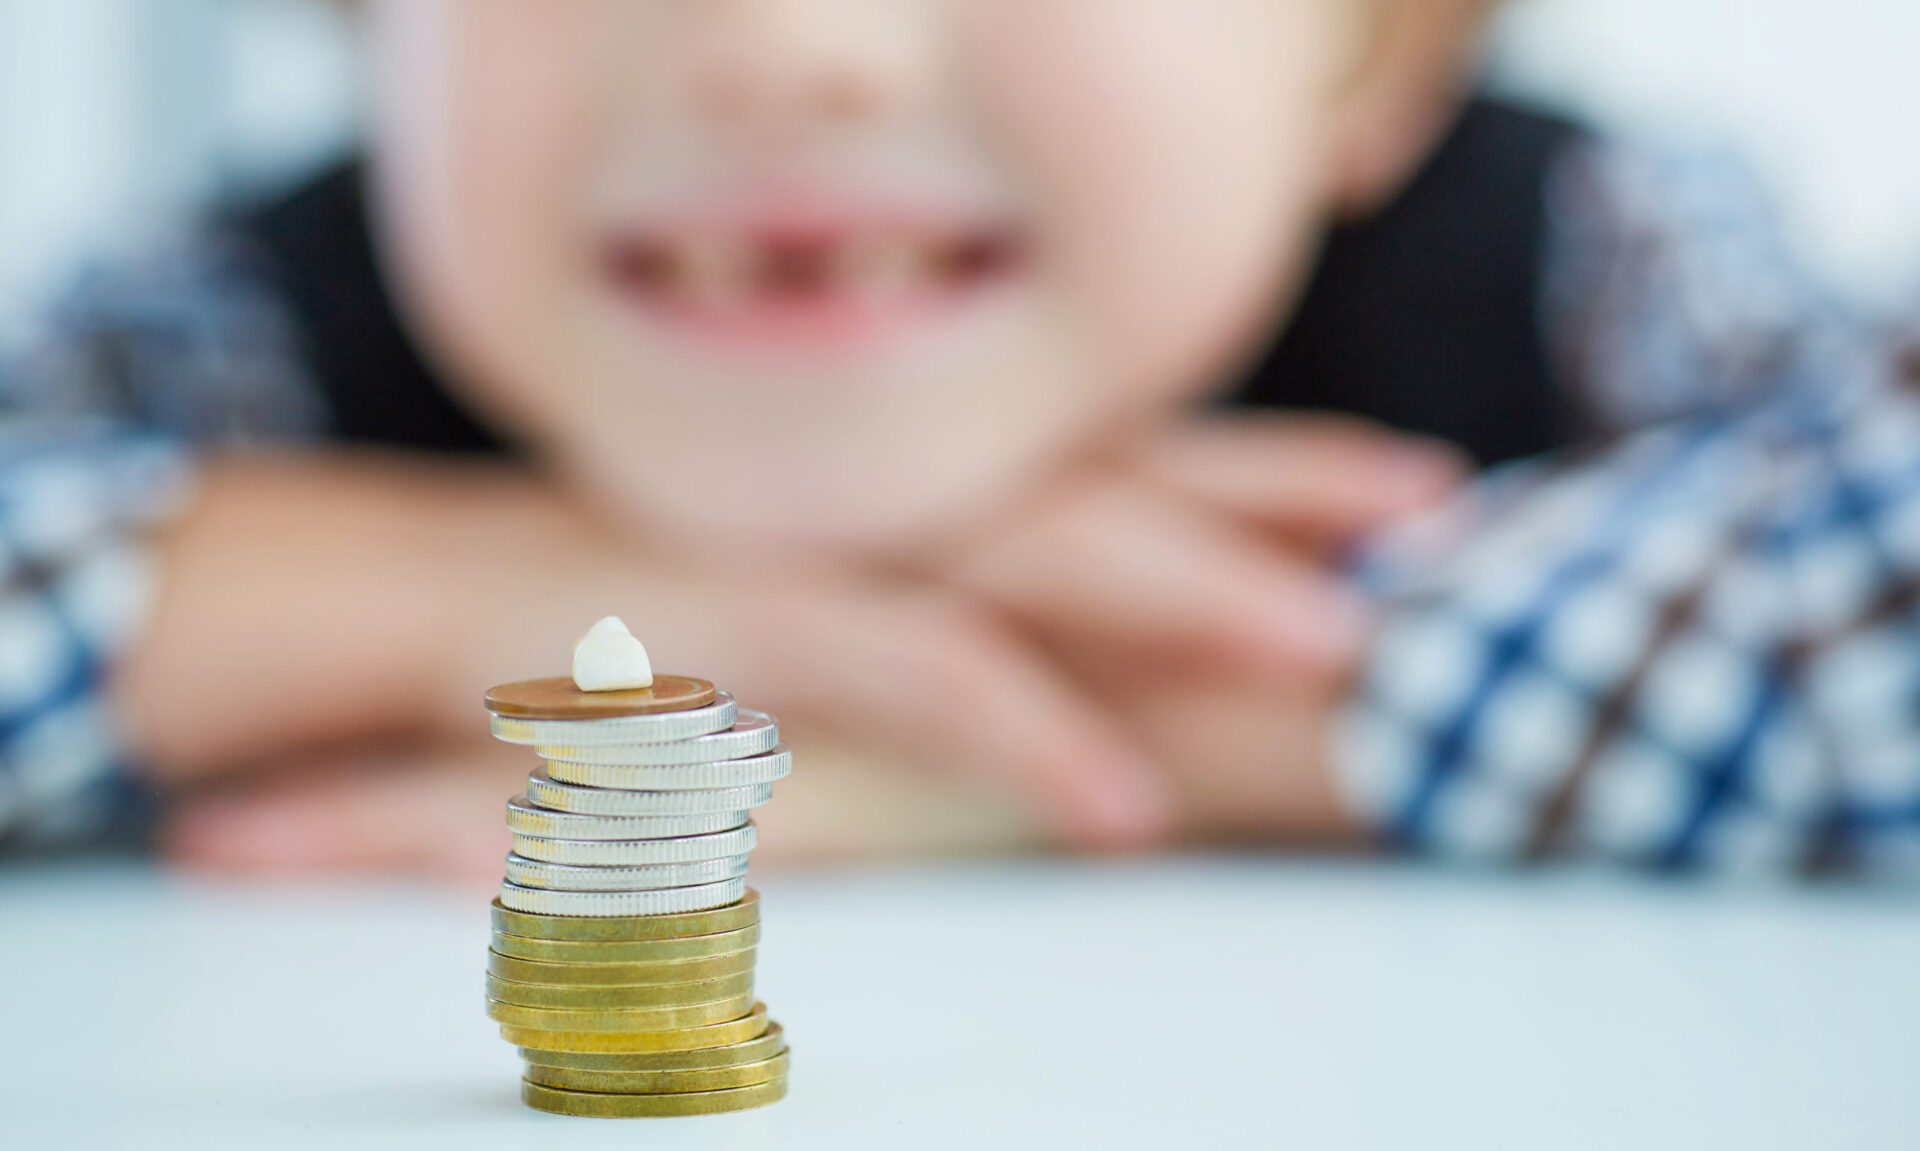 Smiling young boy with missing front tooth. Pile of coins with a baby tooth on top. Tooth fairy giving money coins as a reward for child teeth.